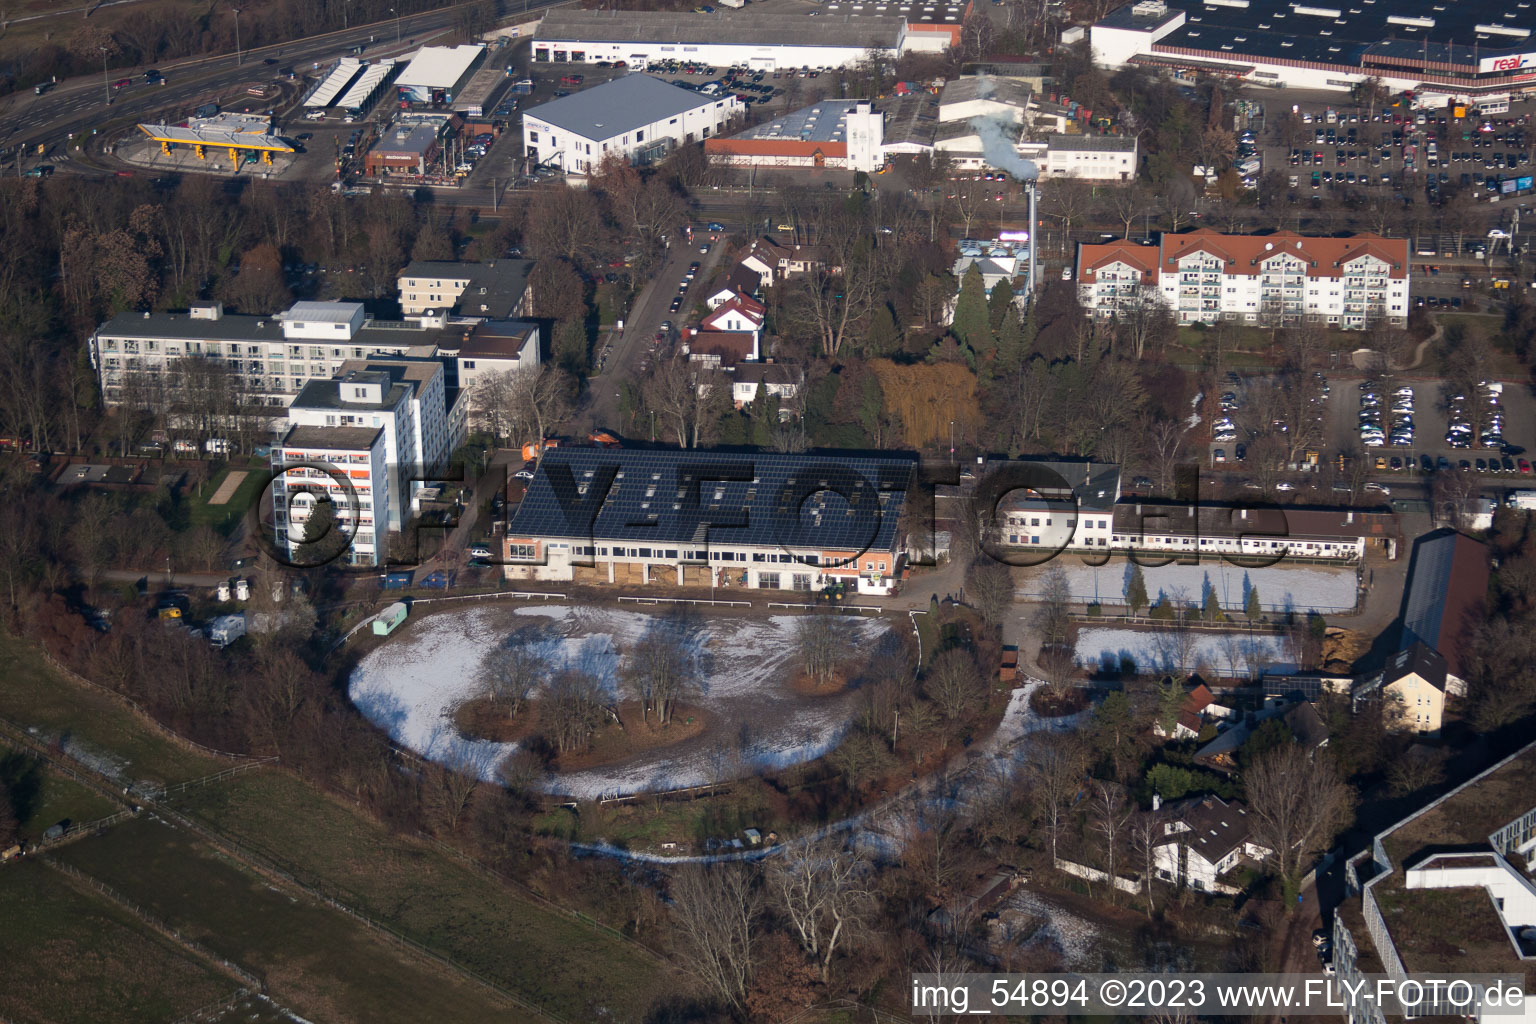 Drone image of District Oggersheim in Ludwigshafen am Rhein in the state Rhineland-Palatinate, Germany